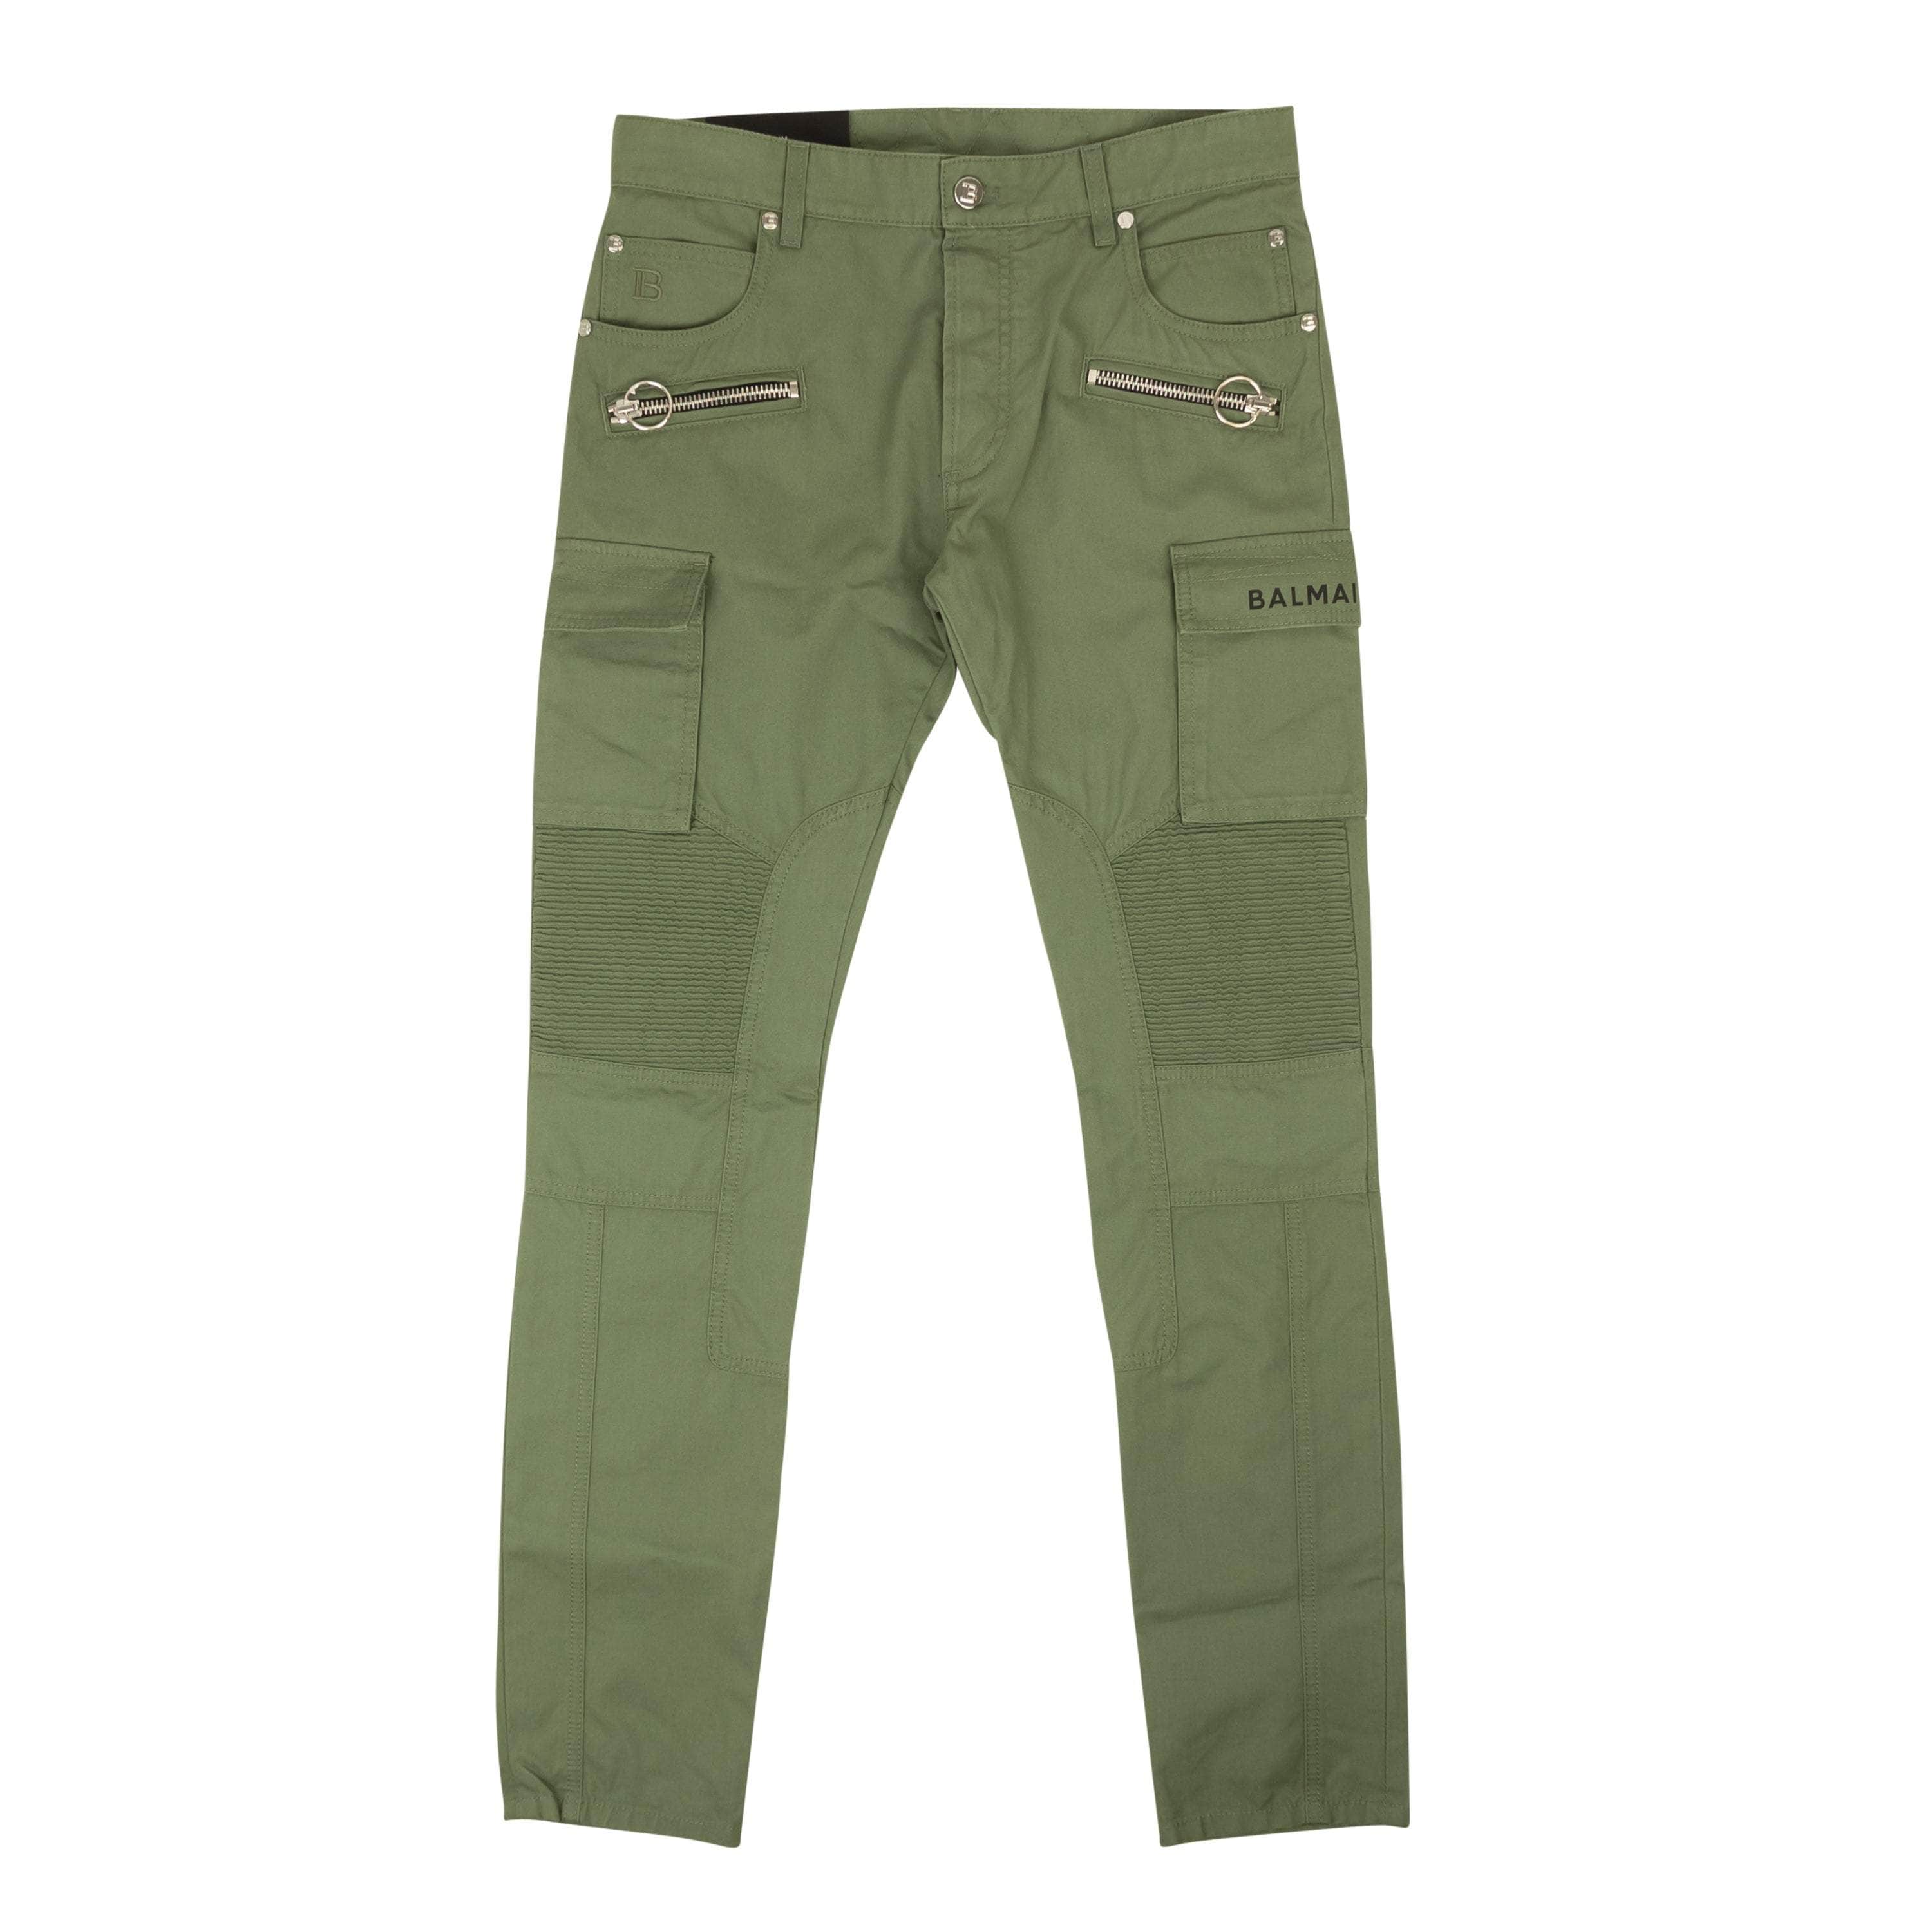 Balmain 1000-2000, channelenable-all, chicmi, couponcollection, gender-mens, main-clothing, mens-cargo-pants, mens-shoes, size-30 30 Green Khaki Slim Cut Ridged Cotton Cargo Jeans 95-BLM-1004/30 95-BLM-1004/30